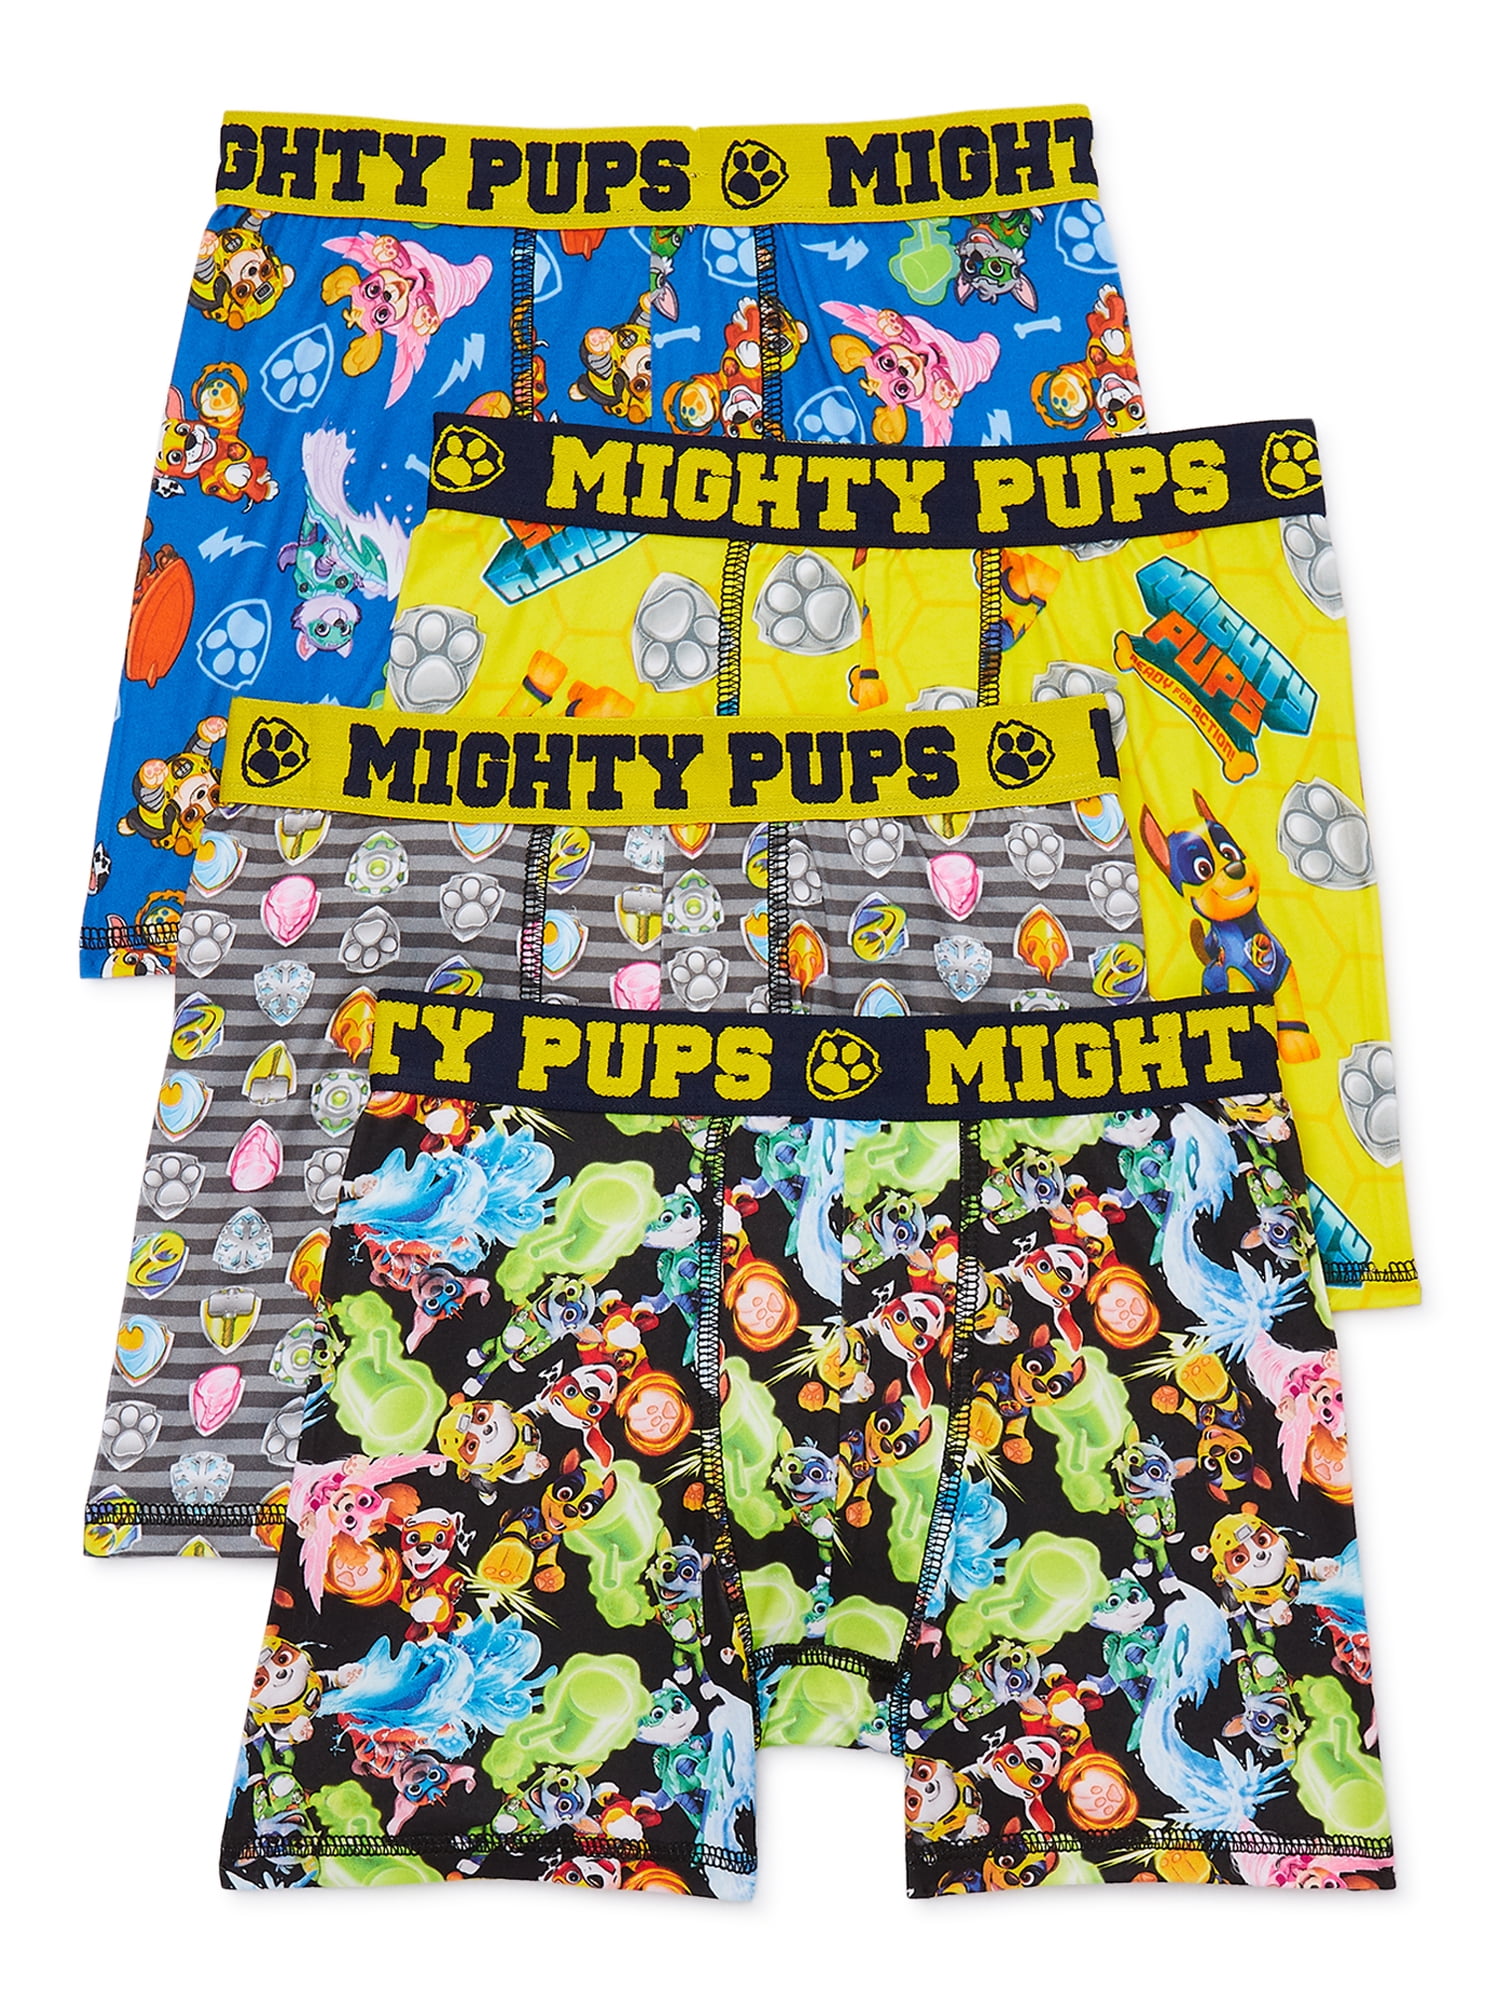 Patrol Boys Mighty Pups Boxer Brief Underpants, 4 pack, Sizes 4-10 -